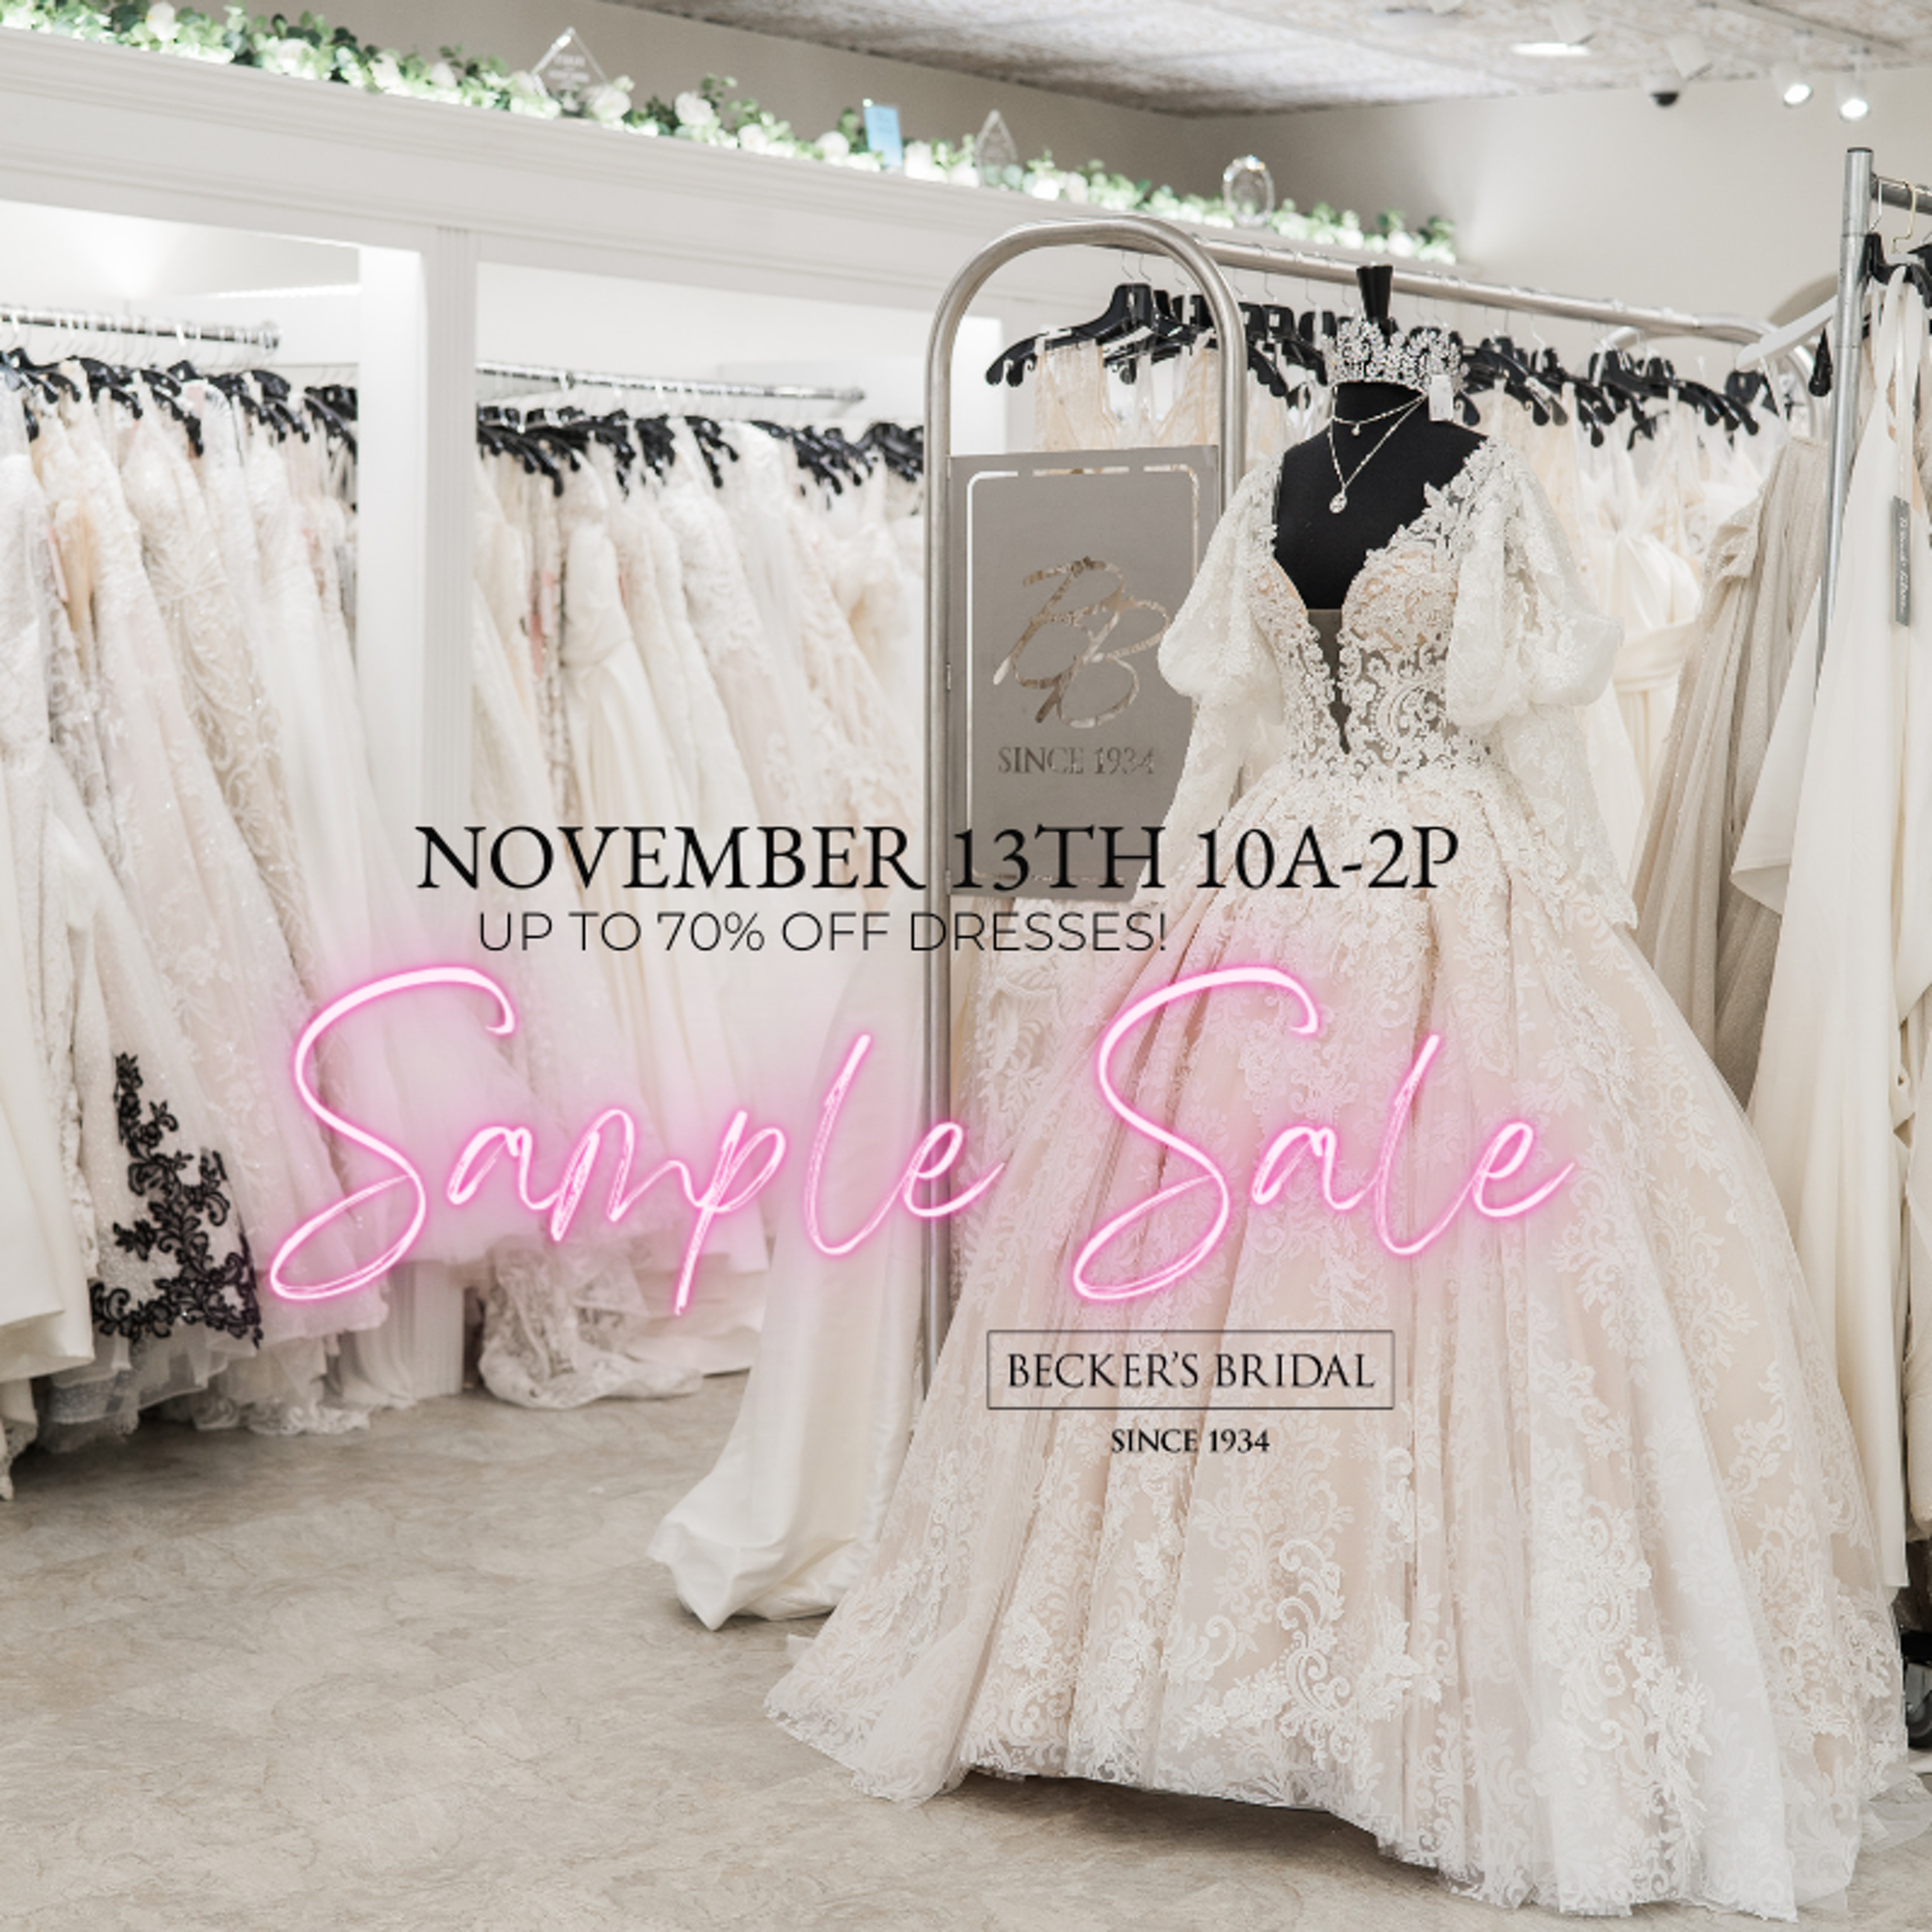 beckers-bridal-annual-sample-sale-wedding-dress-event